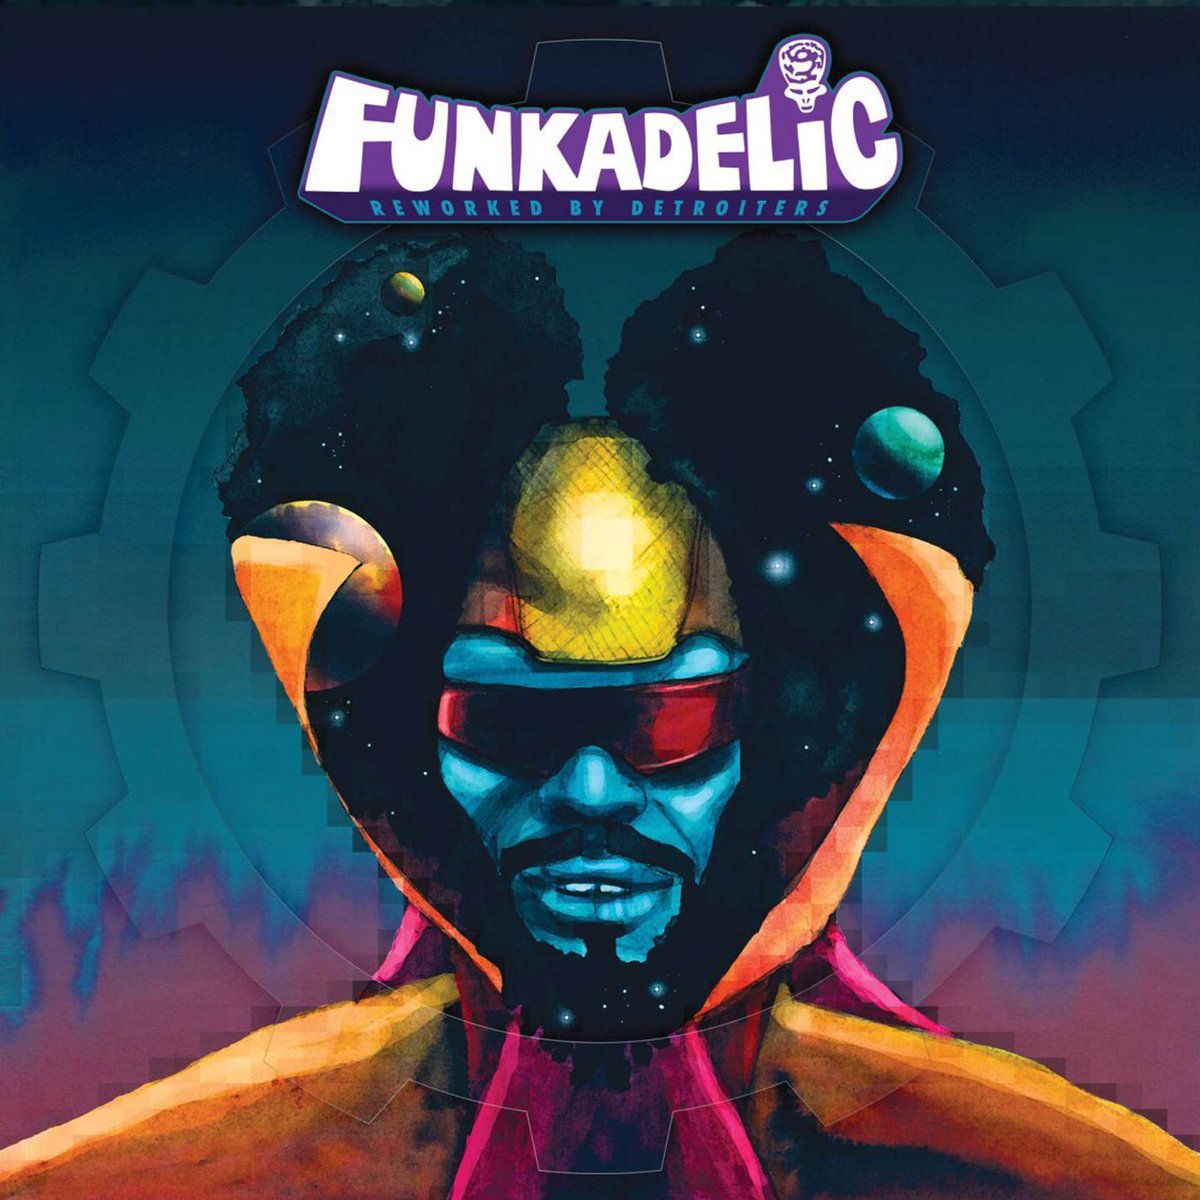 Following his first contractual label dispute, GC lost Parliament’s name & so he rebranded the band as Funkadelic. Funkadelic, a funk-rock band featuring the touring musicians & the singers from Parliament as uncredited guests.